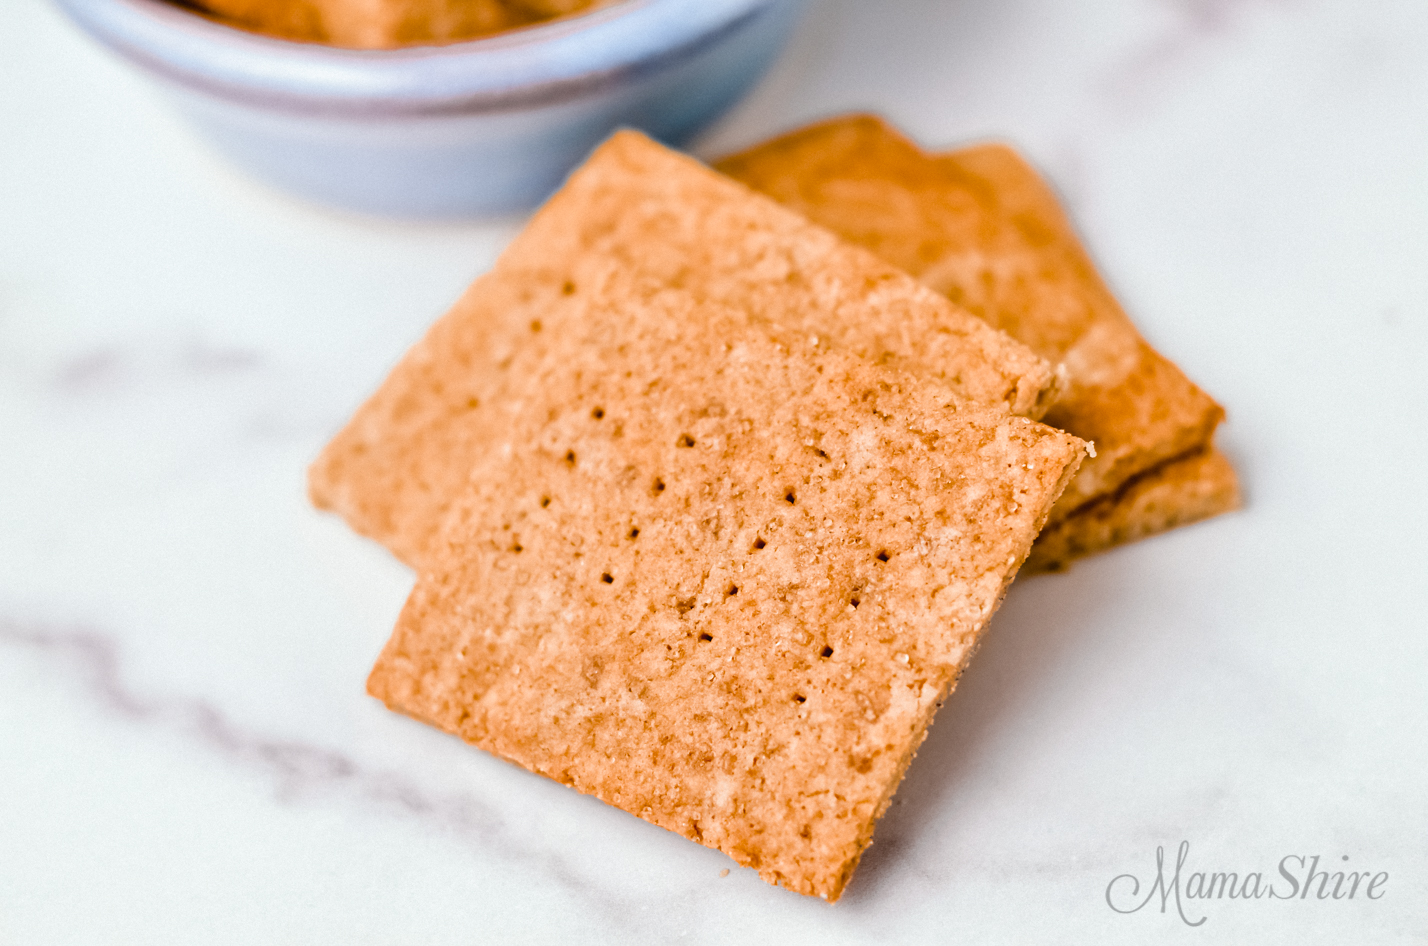 Graham crackers on a marble background. Crackers made with a homemade gluten-free graham cracker recipe.